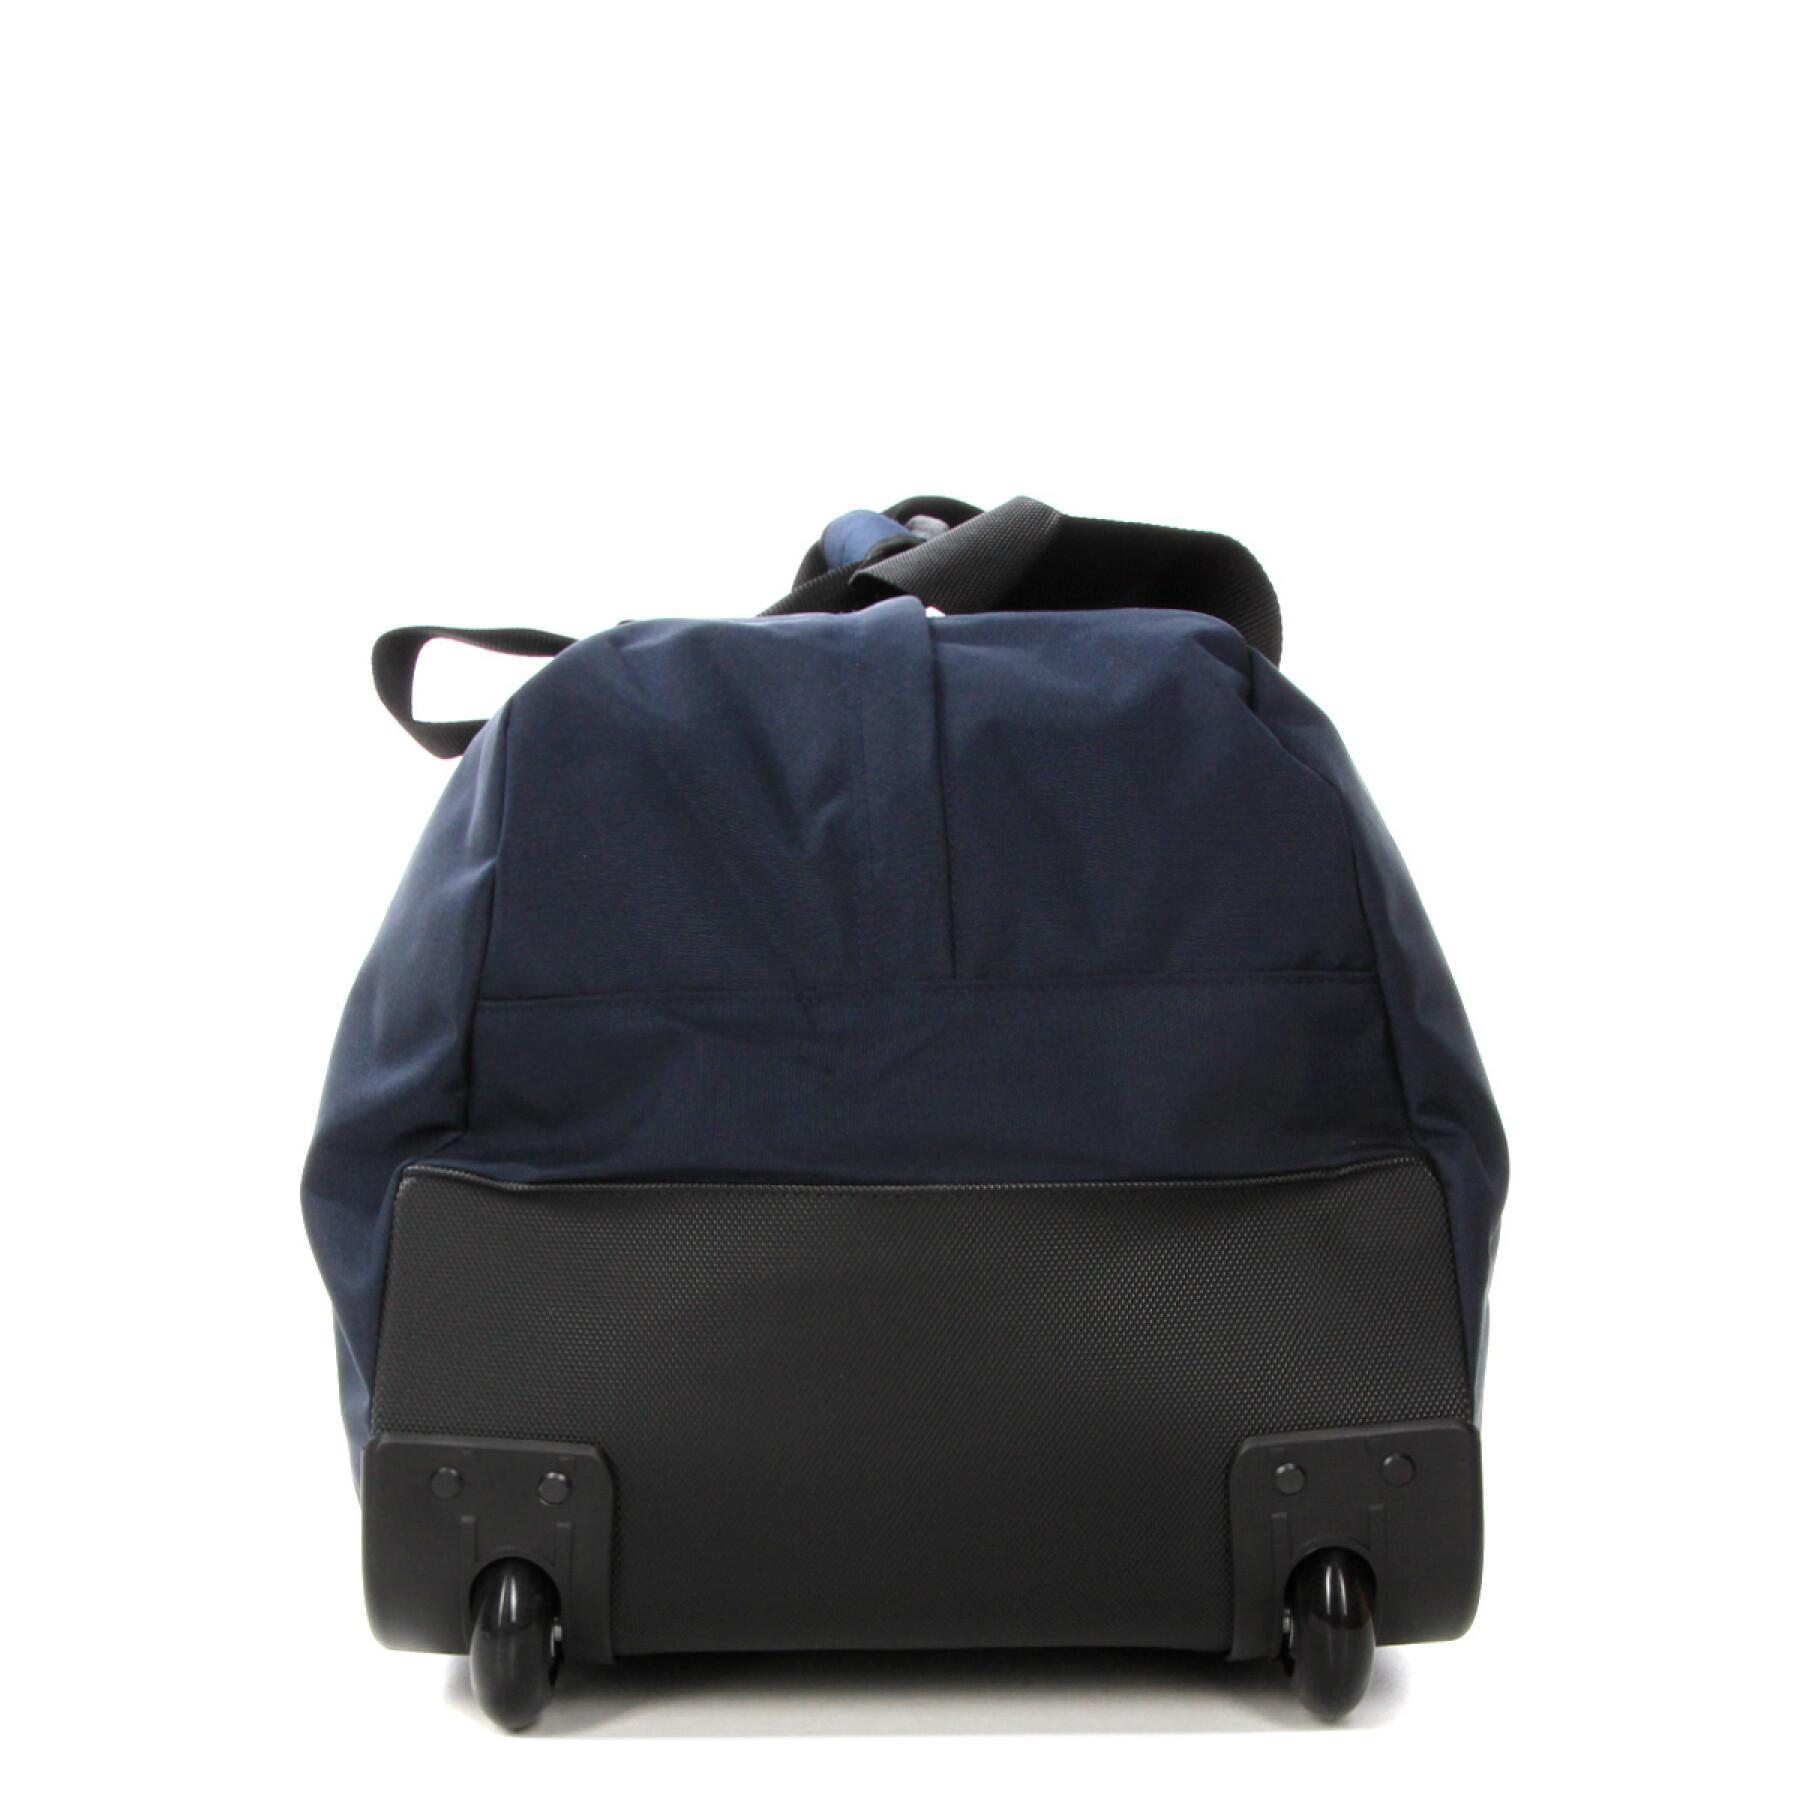 Eastpak Container 65 + suitcase